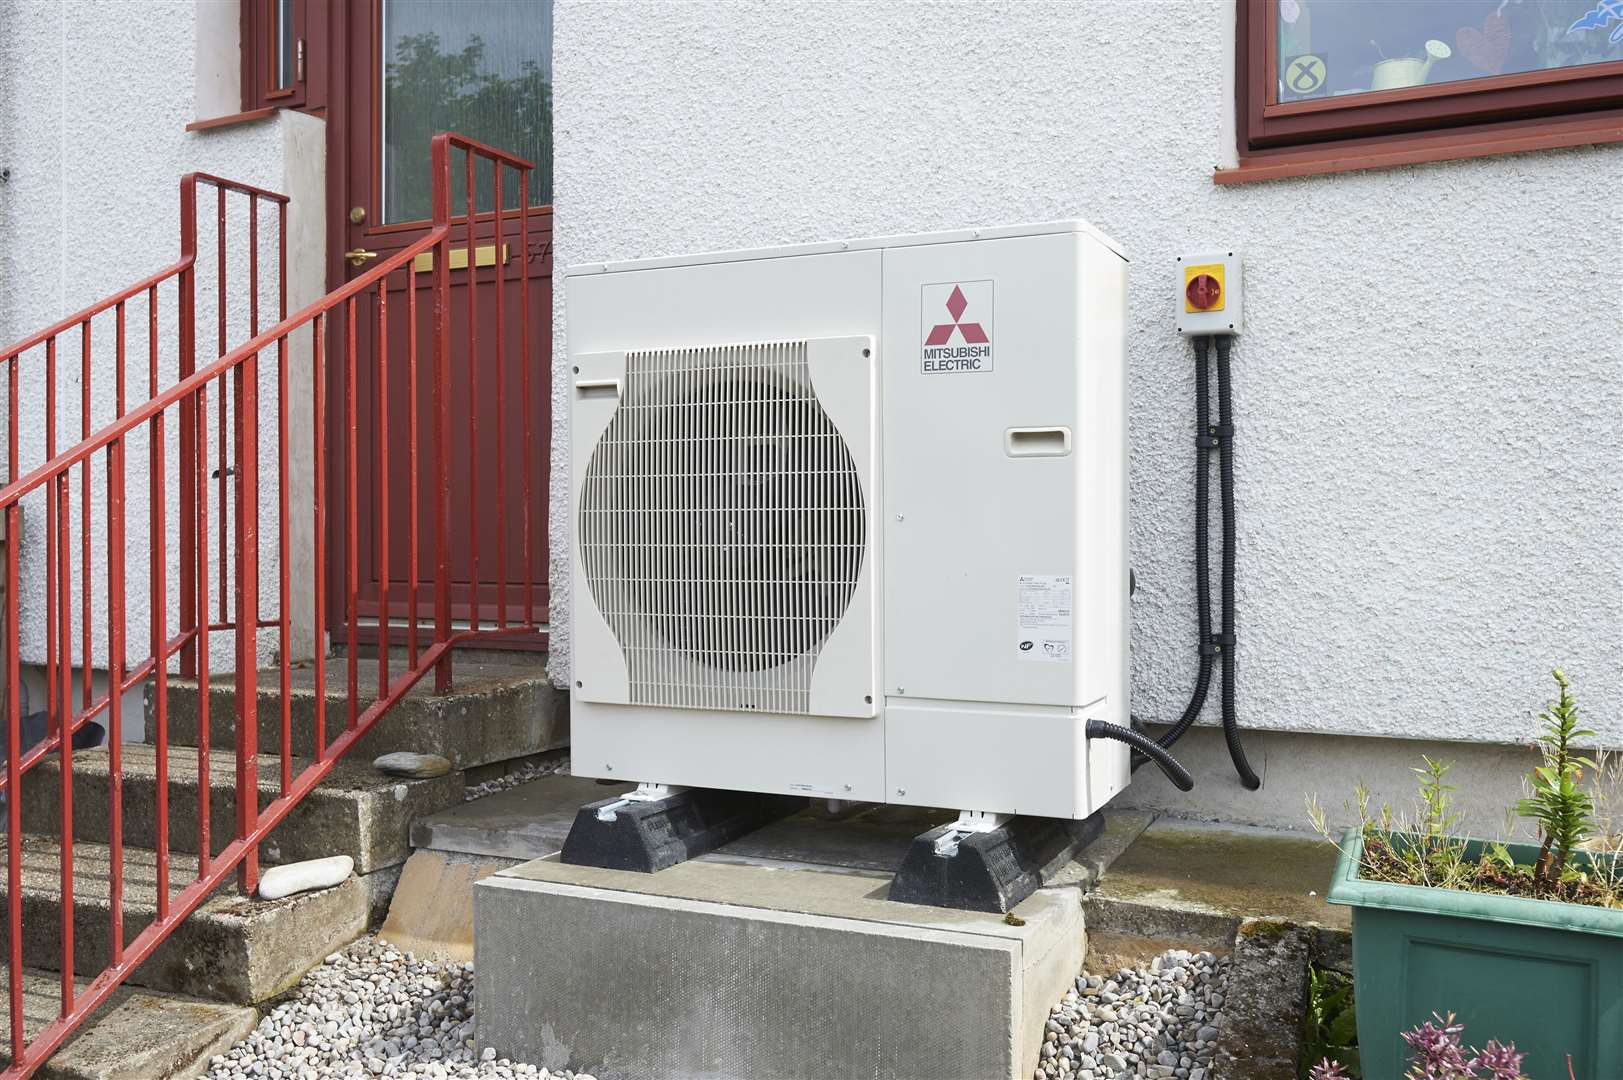 Air source heat pumps use electricity to convert cold air to warm, like a refrigerator in reverse.